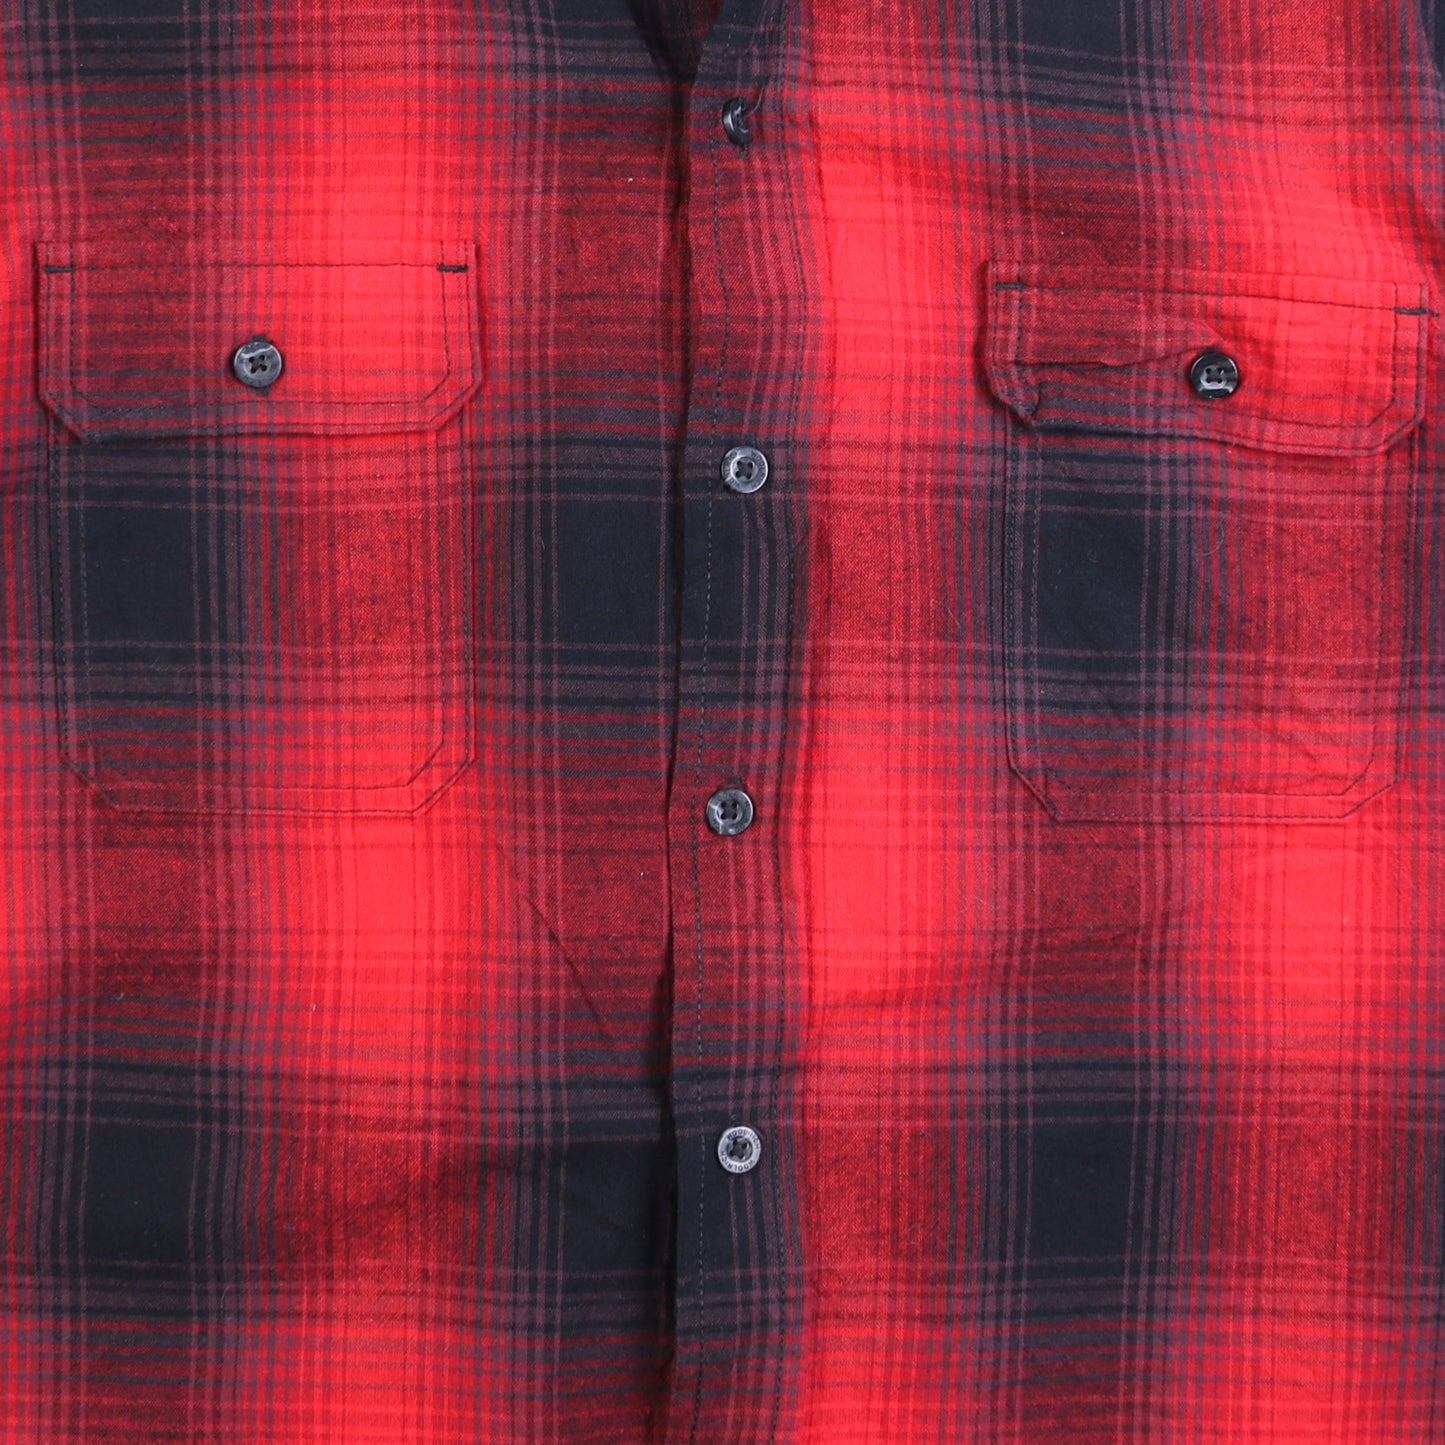 Vintage Flannel Shirt - American Madness